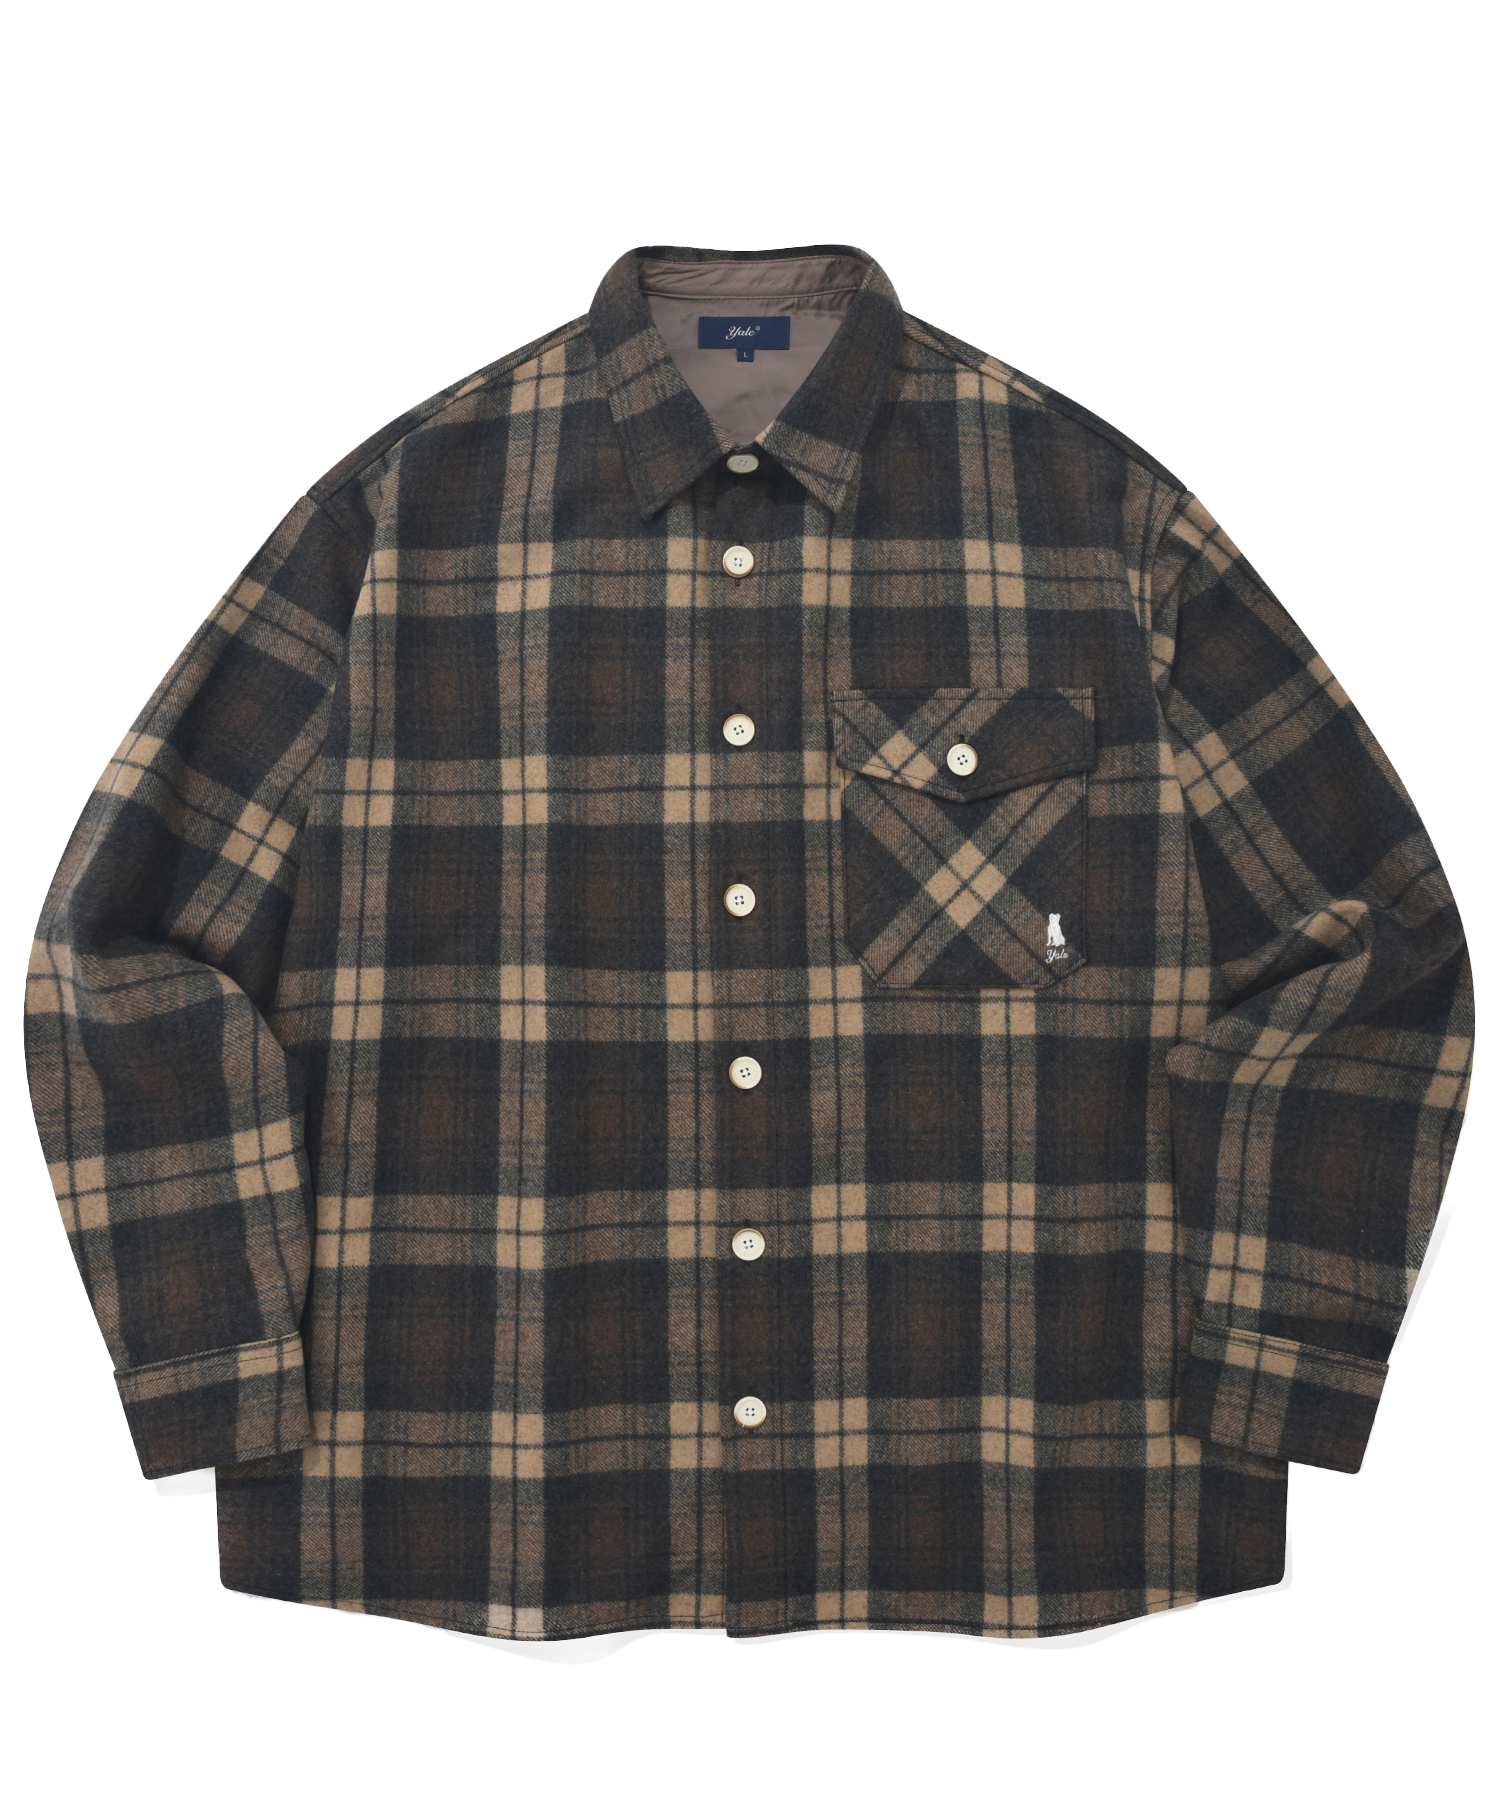 HEAVY WOOL ONE POCKET CHECK SHIRT BROWN